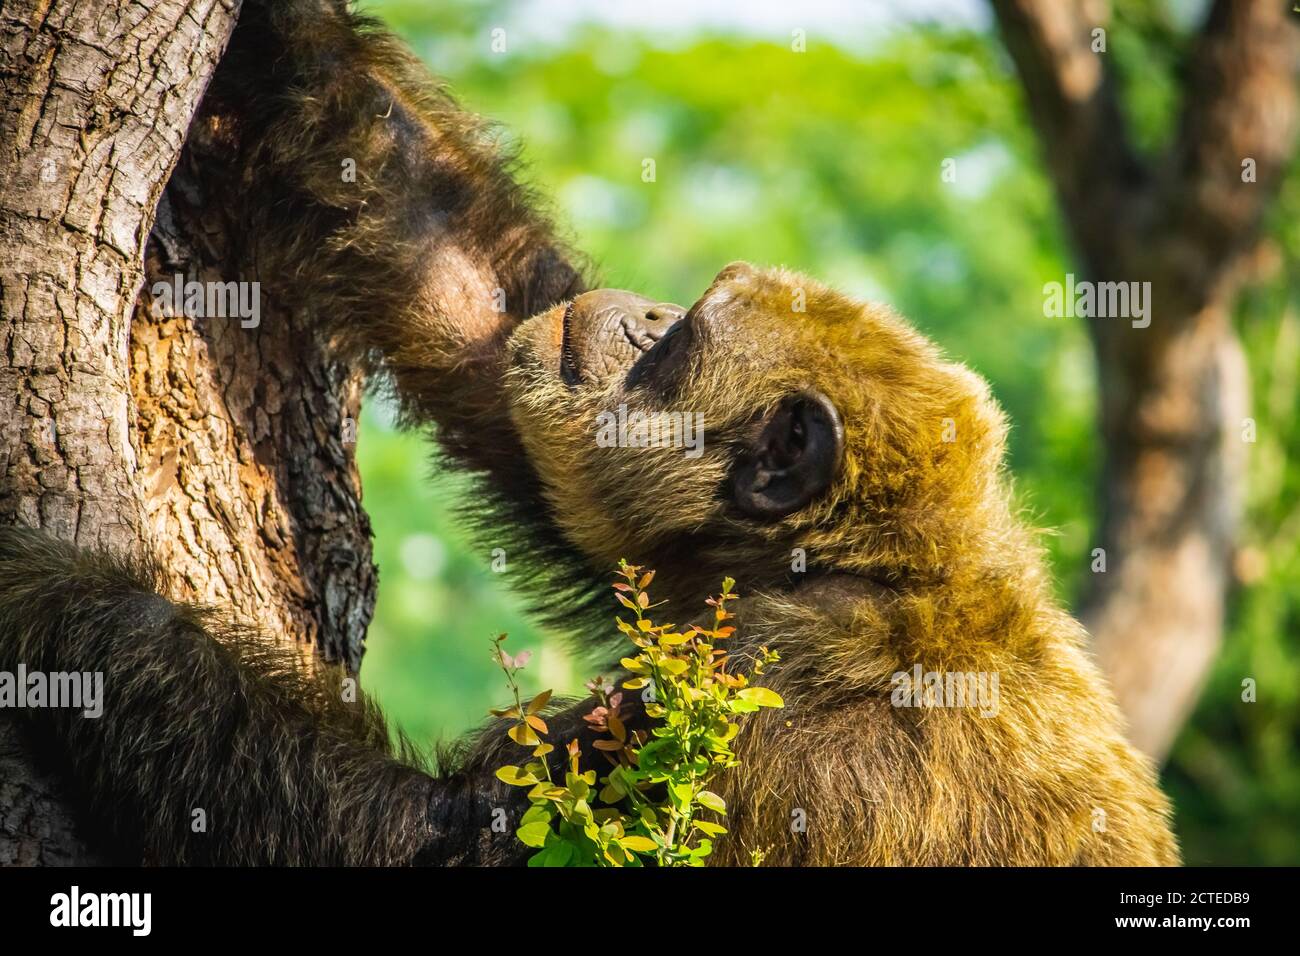 Young gigantic male Chimpanzee claiming tree in Habitat forest jungle. Chimpanzee in close up view with thoughtful expression. Monkey & Apes family Stock Photo